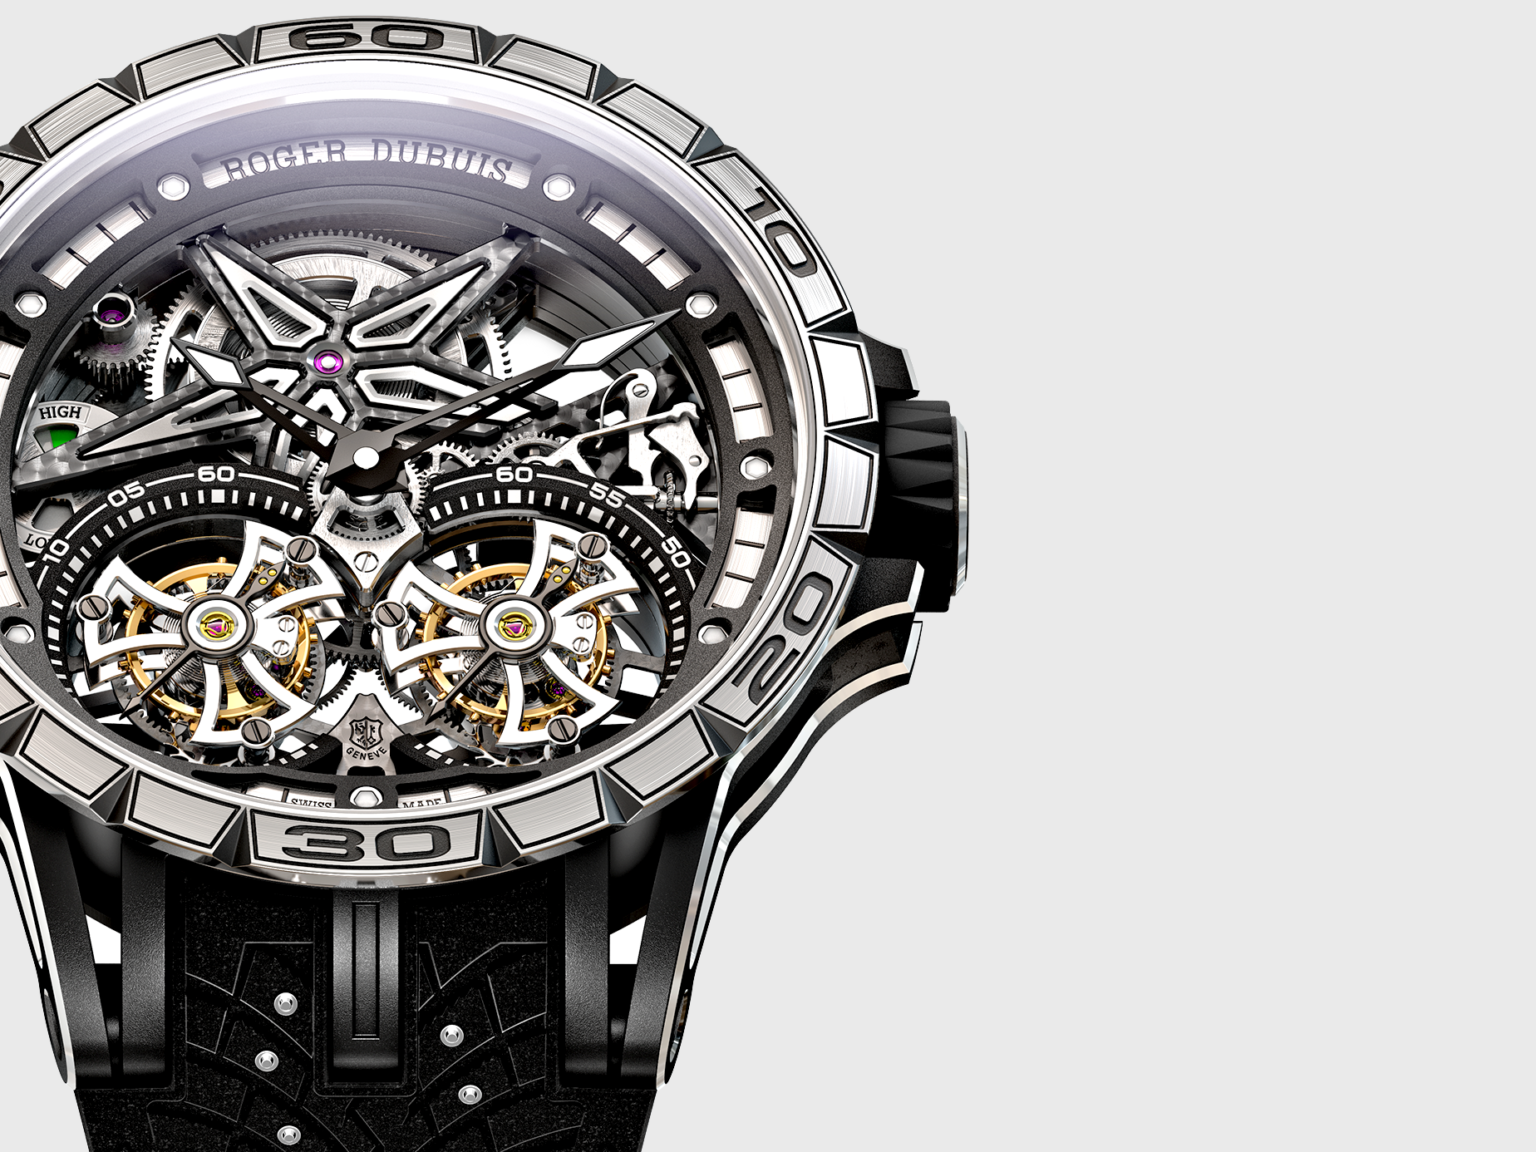 Lamborghini, Roger Dubuis, and Pirelli joined forces in Aspen to launch a new, very exclusive watch.